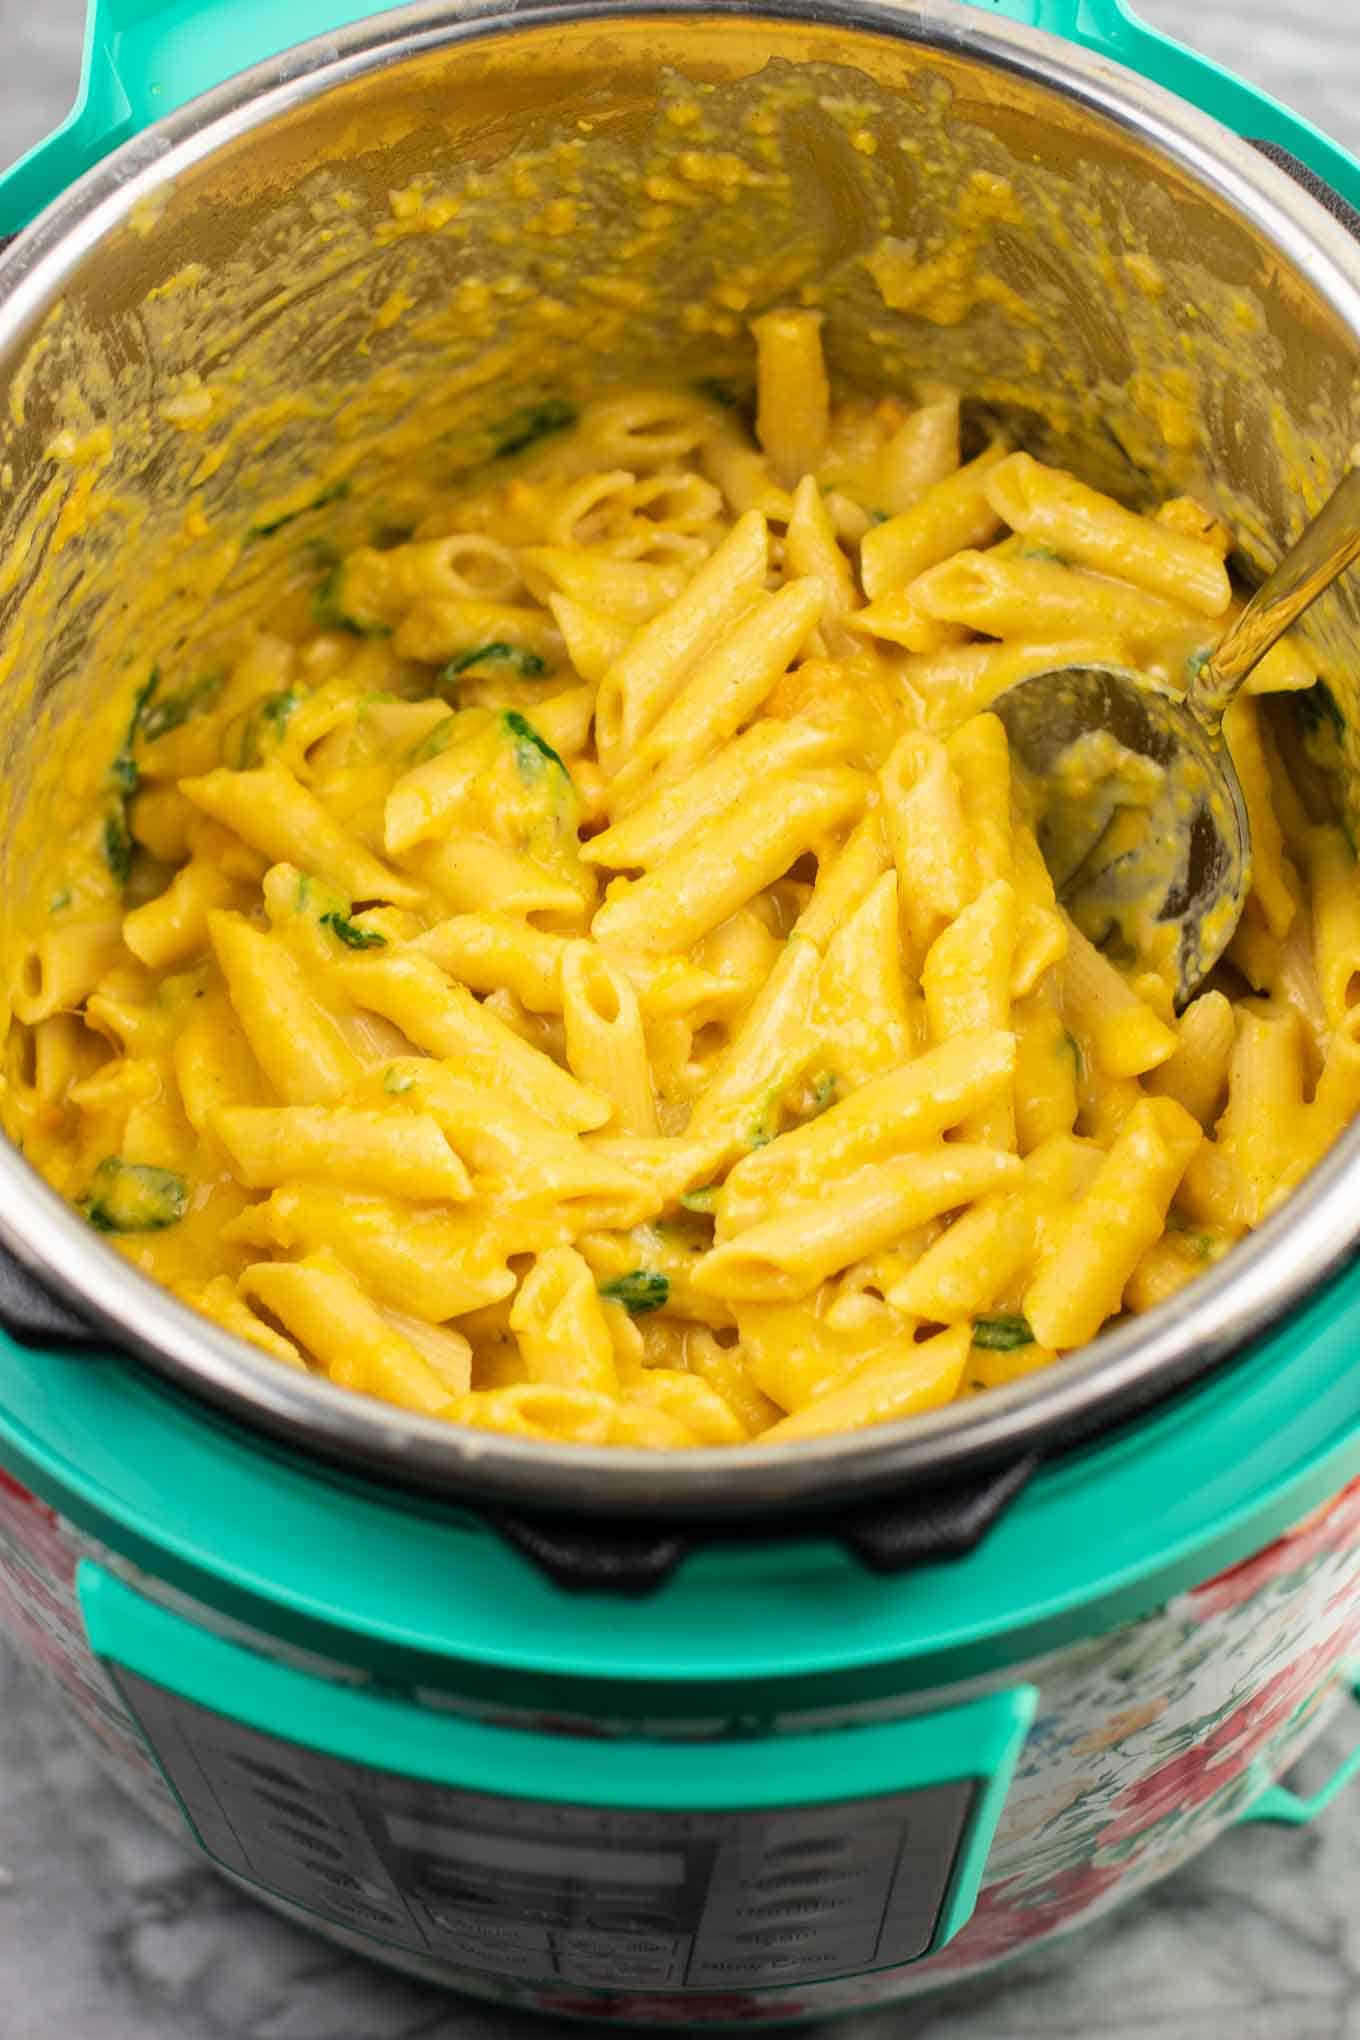 Instant Pot Creamy Sweet Potato Pasta (vegetarian) – this is the perfect fall recipe and tastes AMAZING! Even my two year old loved it, and it was a great way to sneak in more veggies! Definitely will be making this one again. #instantpot #instantpotrecipe #instantpotvegetarian #vegetarian #easydinner #dinner #vegetariandinner #sweetpotatorecipe #fallrecipe